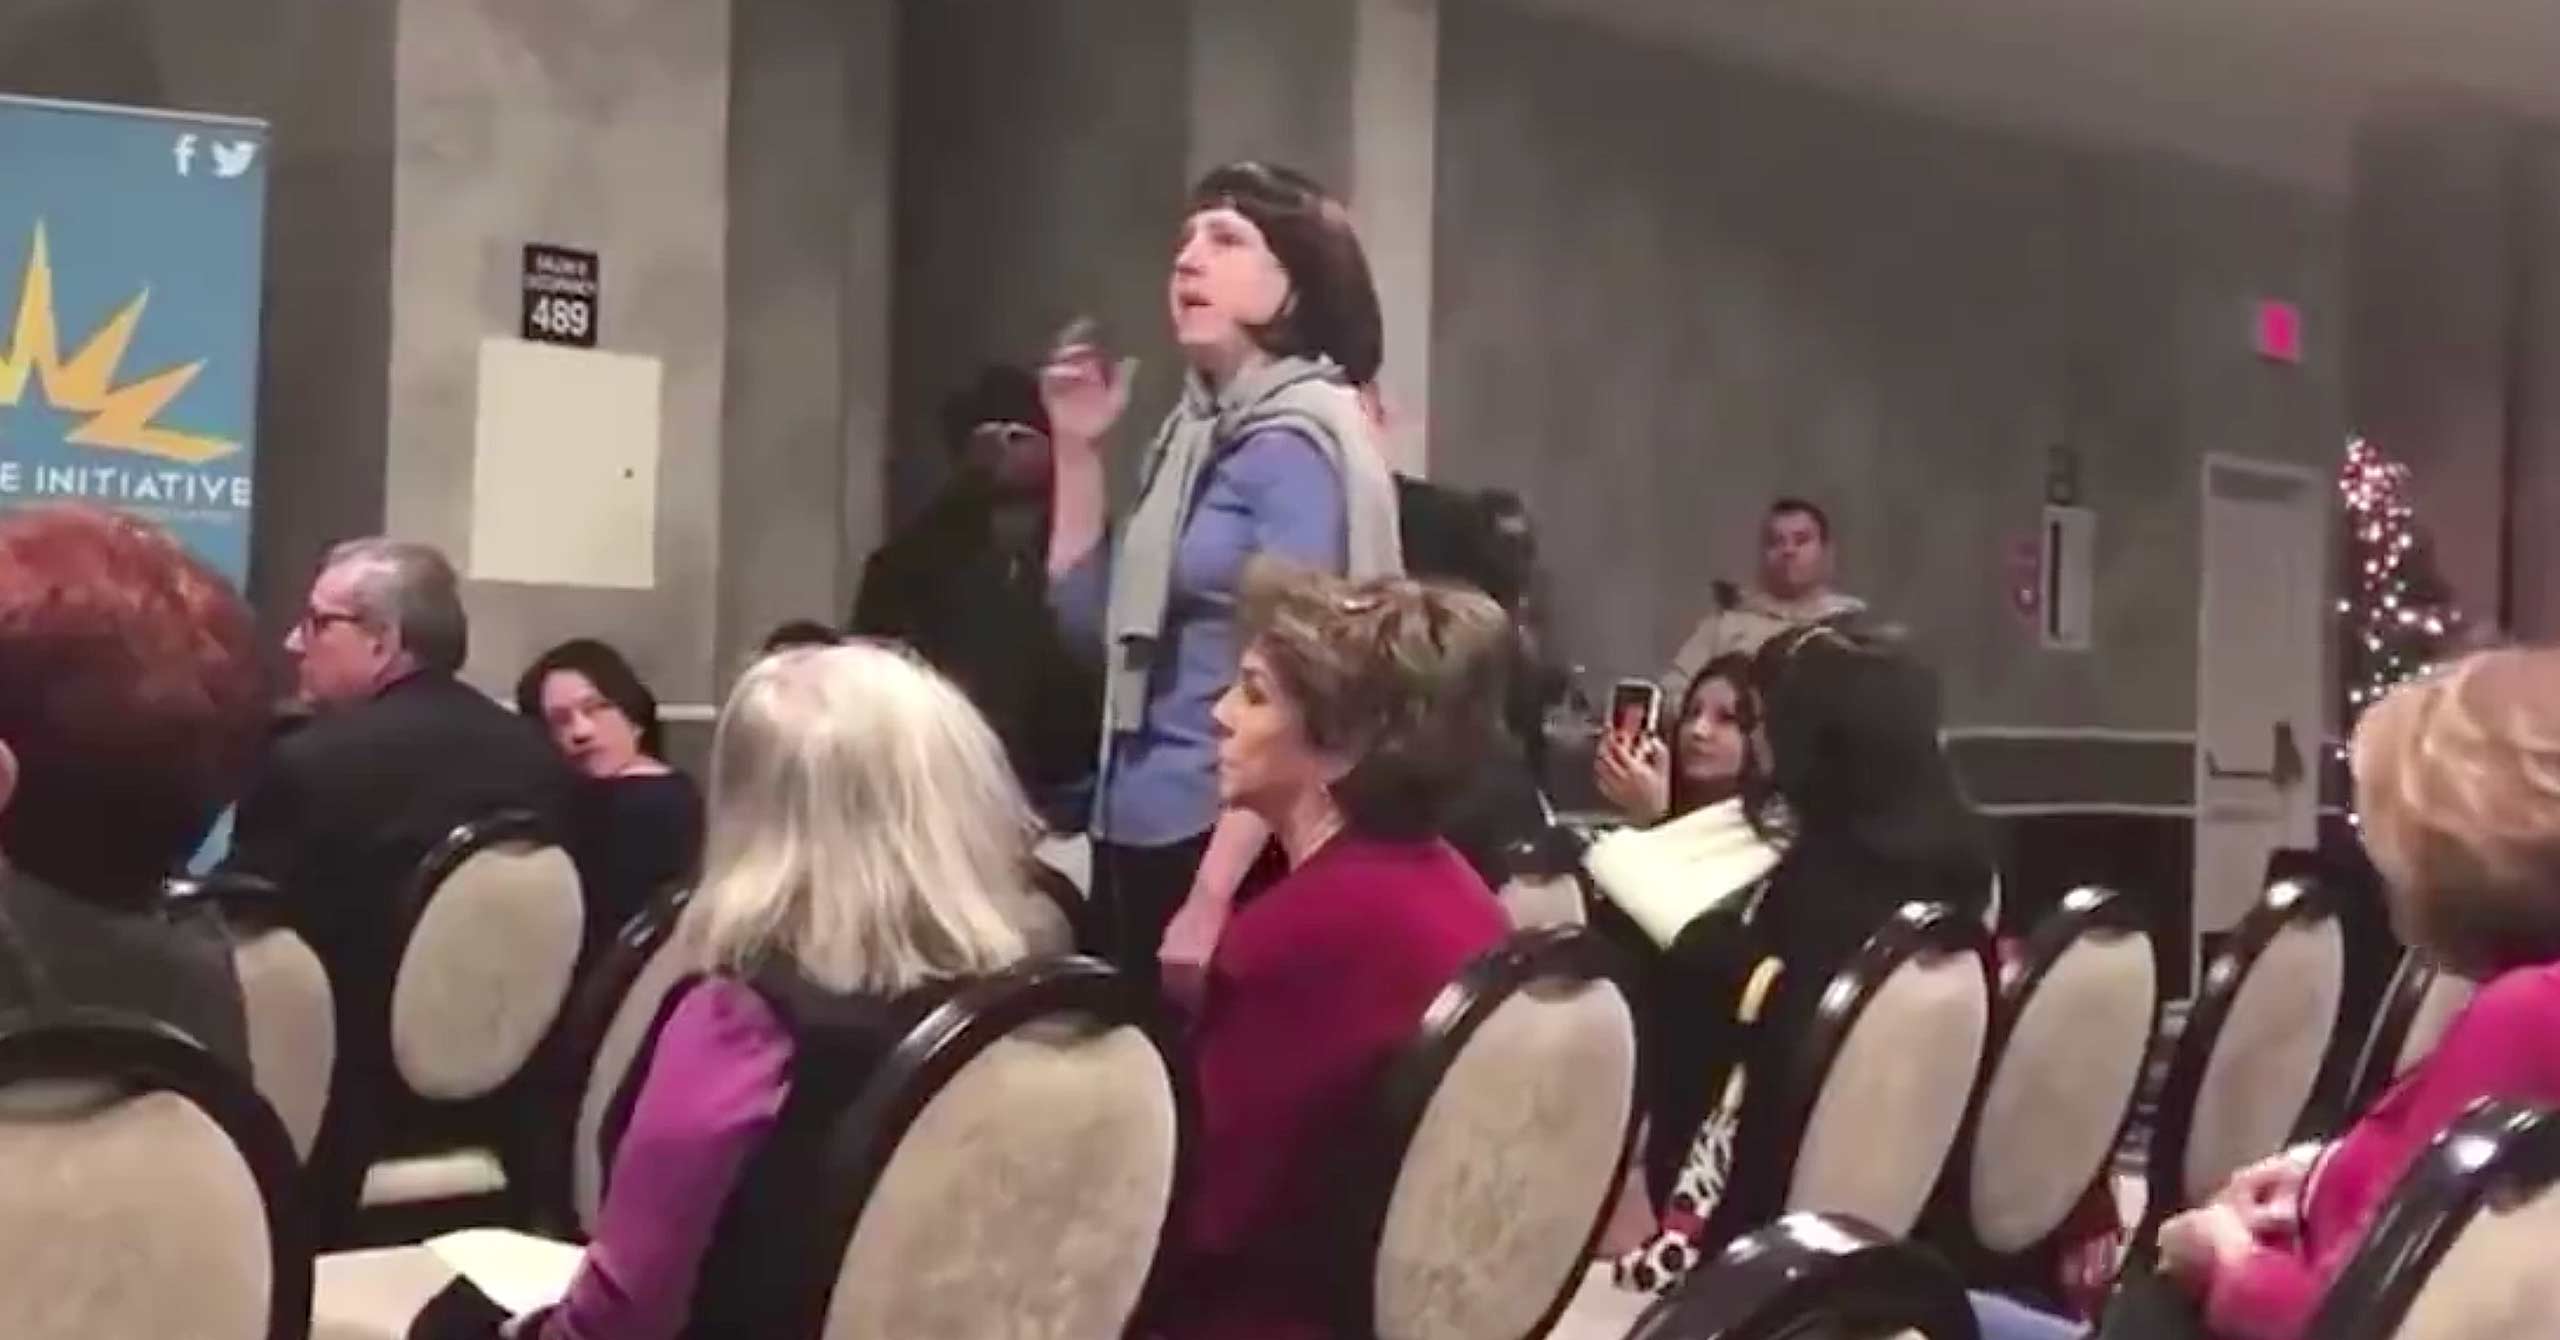 Laura Packard was asked to leave a 2017 town hall featuring Sen. Dean Heller after she questioned his vote to eliminate the ACA's individual mandate